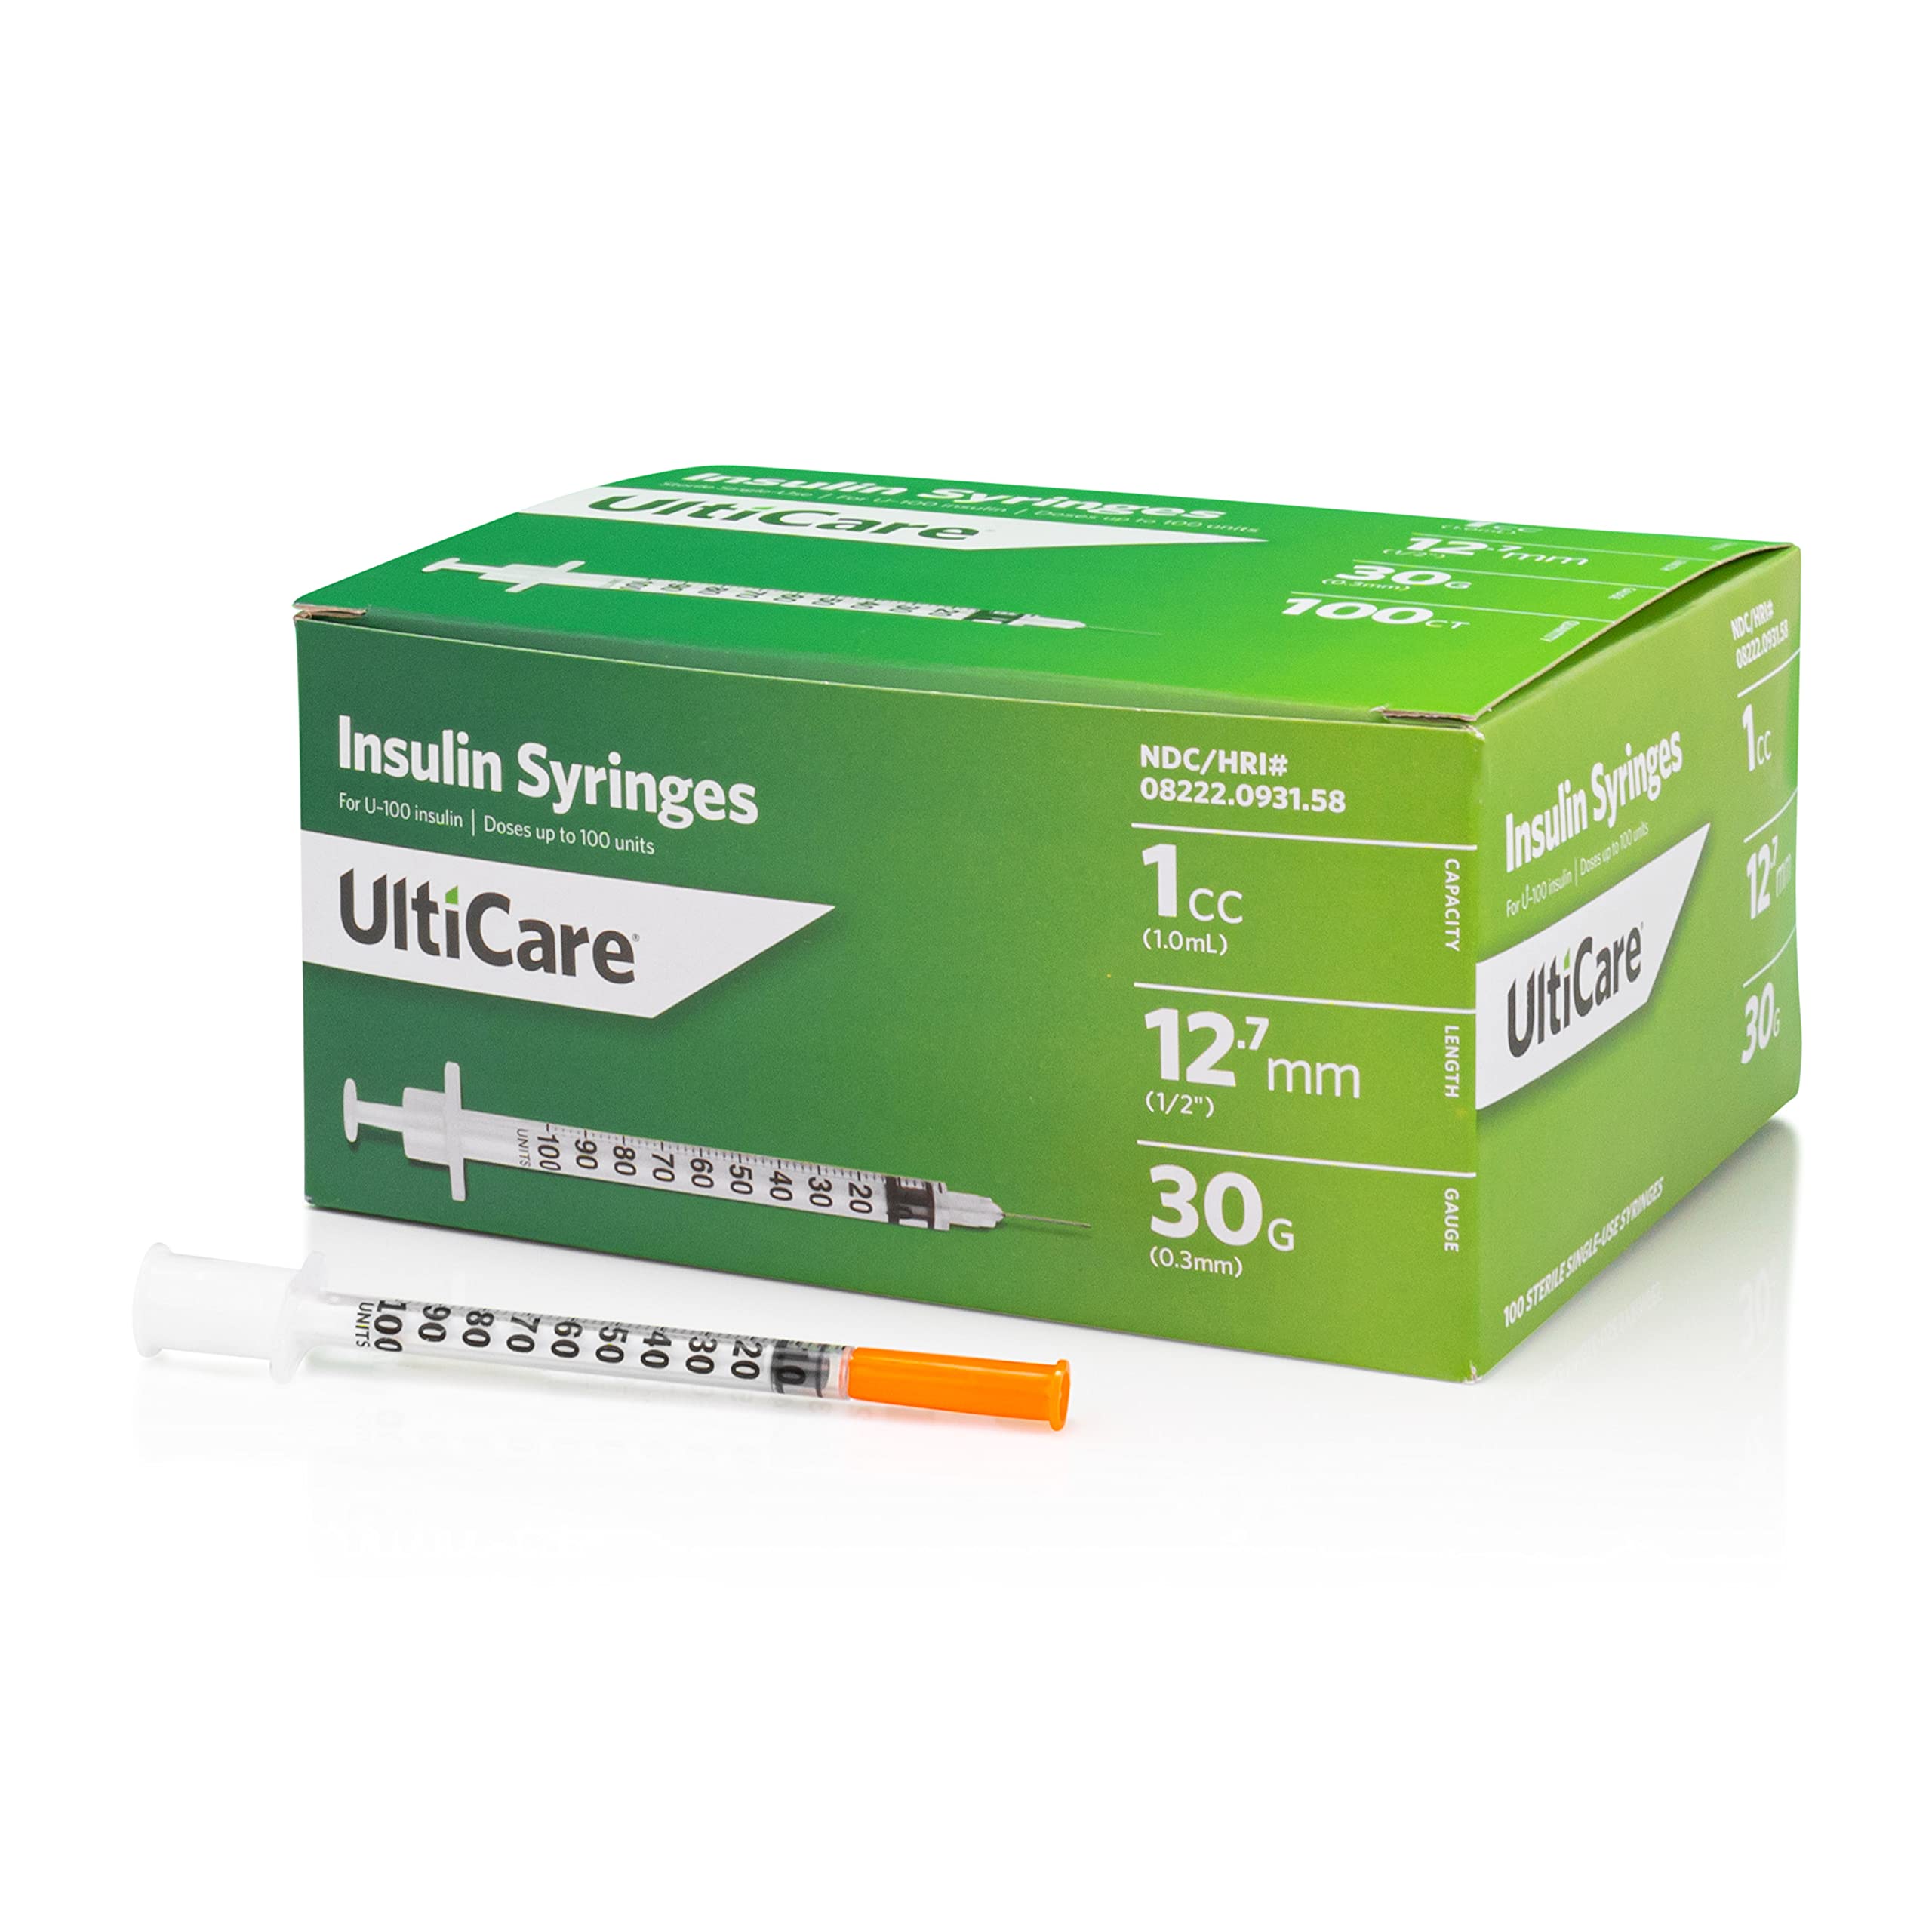 UltiCare U-100 Insulin Syringes, Comfortable and Accurate Dosing of Insulin, Compatible with Any U-100 Strength Insulin, Size: 1cc, 30G x , 100 ct Box